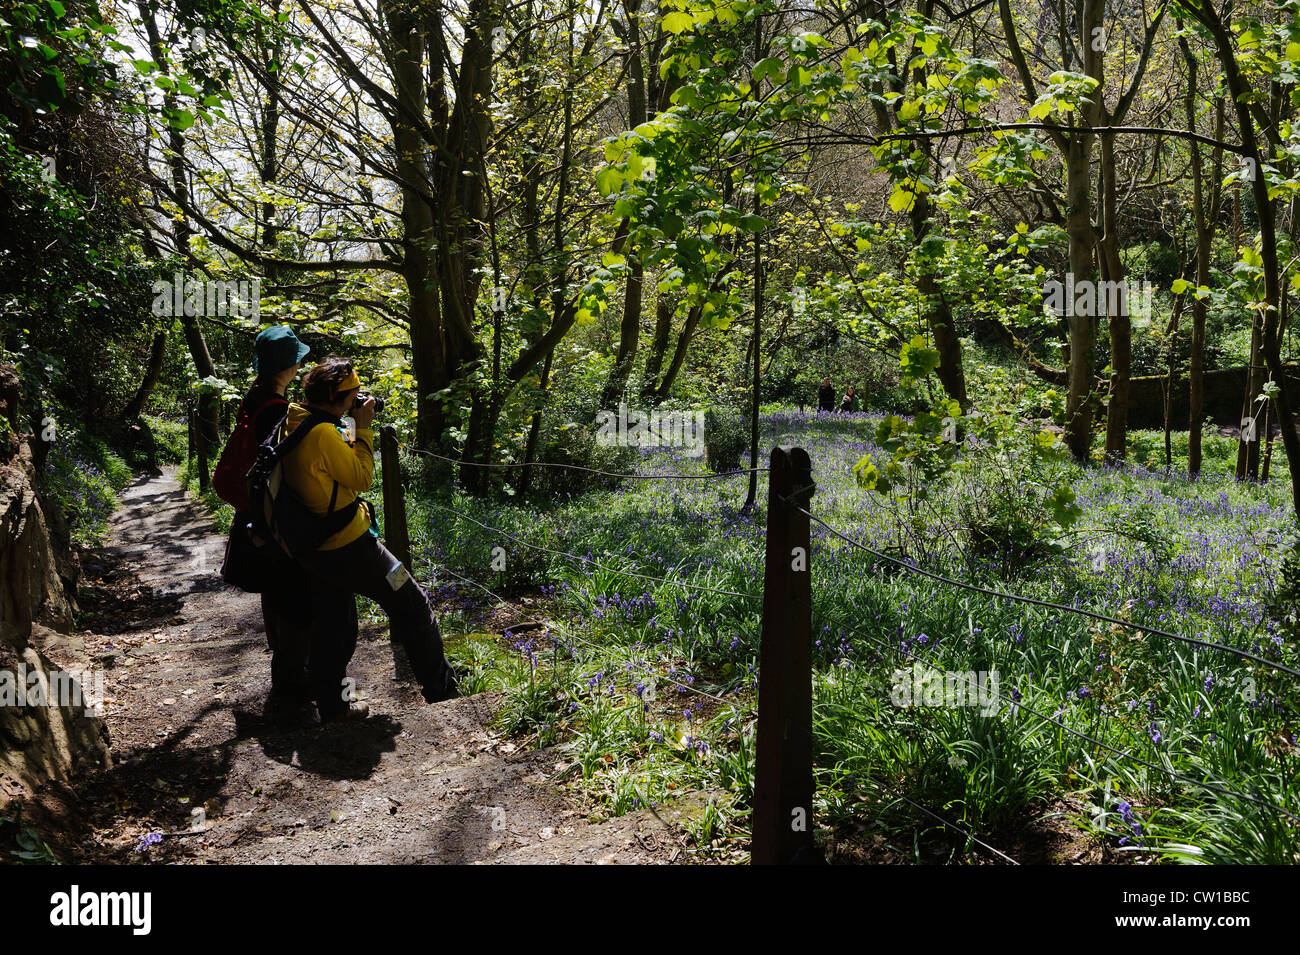 Bluebell (Endymion Nonscriptus) in Bluebell Holz in Fort Feld, Insel Guernsey, Channel Islands Stockfoto